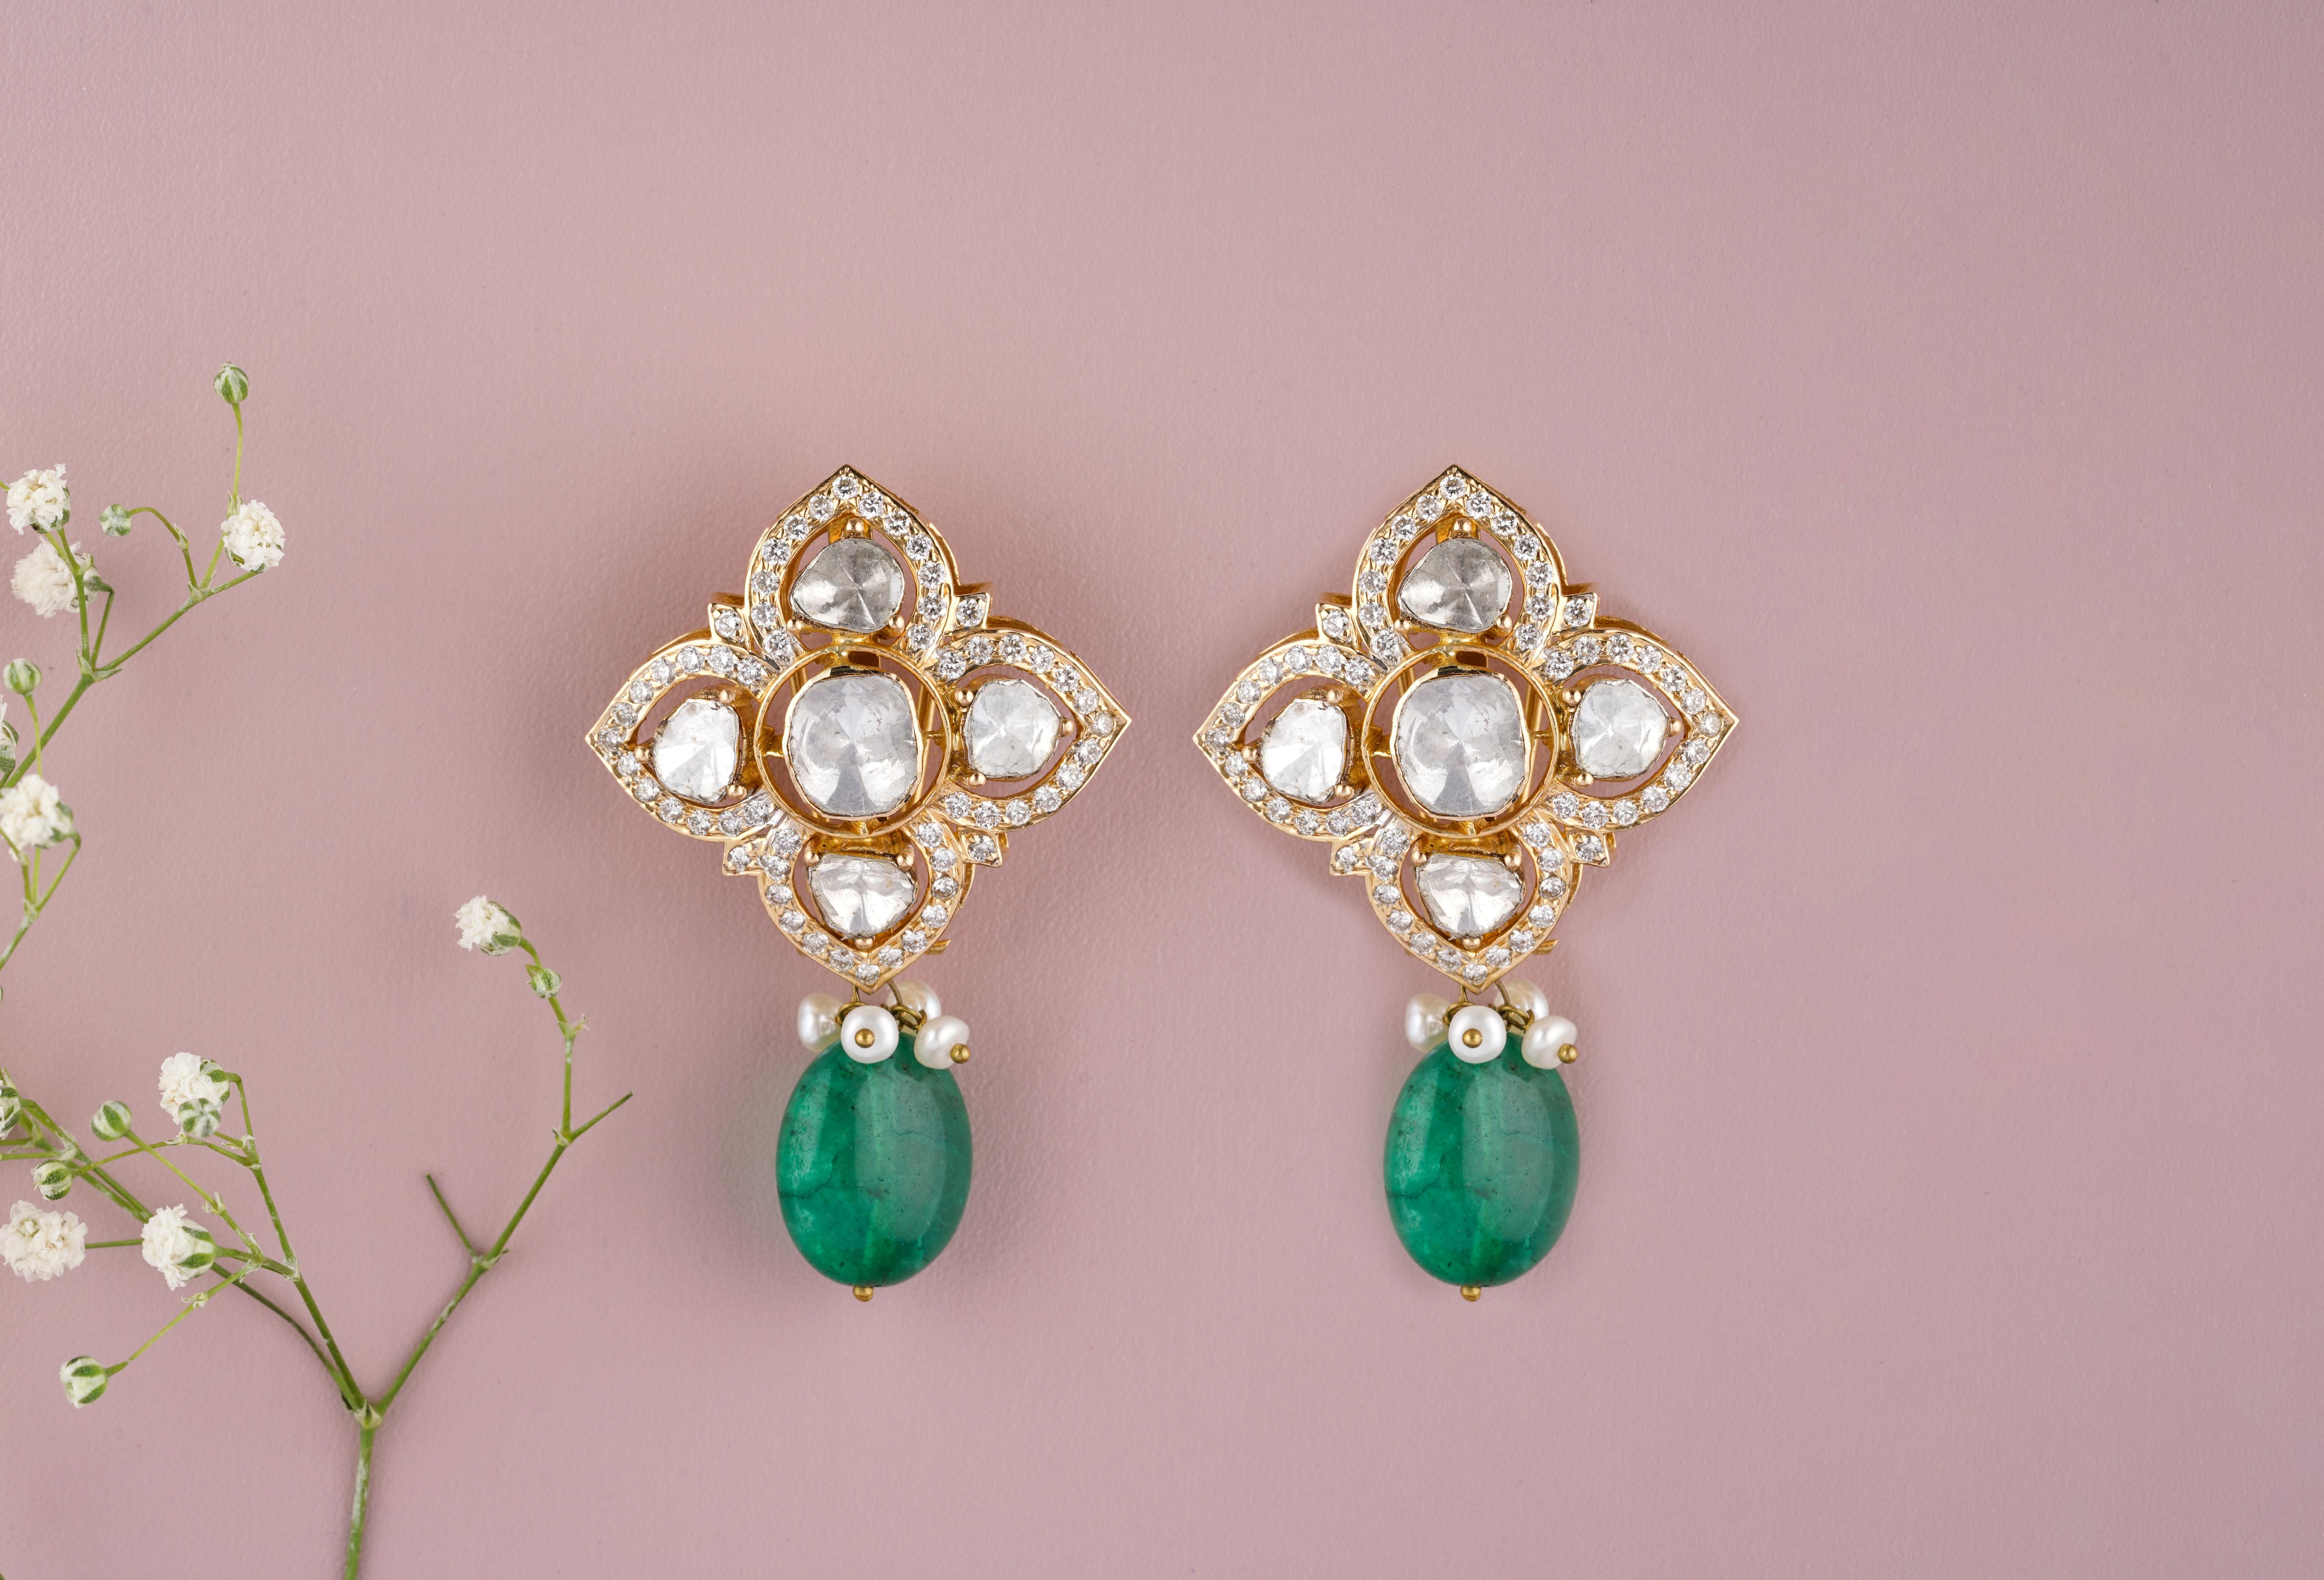 Polki diamond earrings with emeralds are a type of traditional Indian jewelry that feature uncut or raw diamonds (known as Polki) and lush green emeralds. The emeralds provide a pop of color and contrast to the diamonds, making for a stunning and